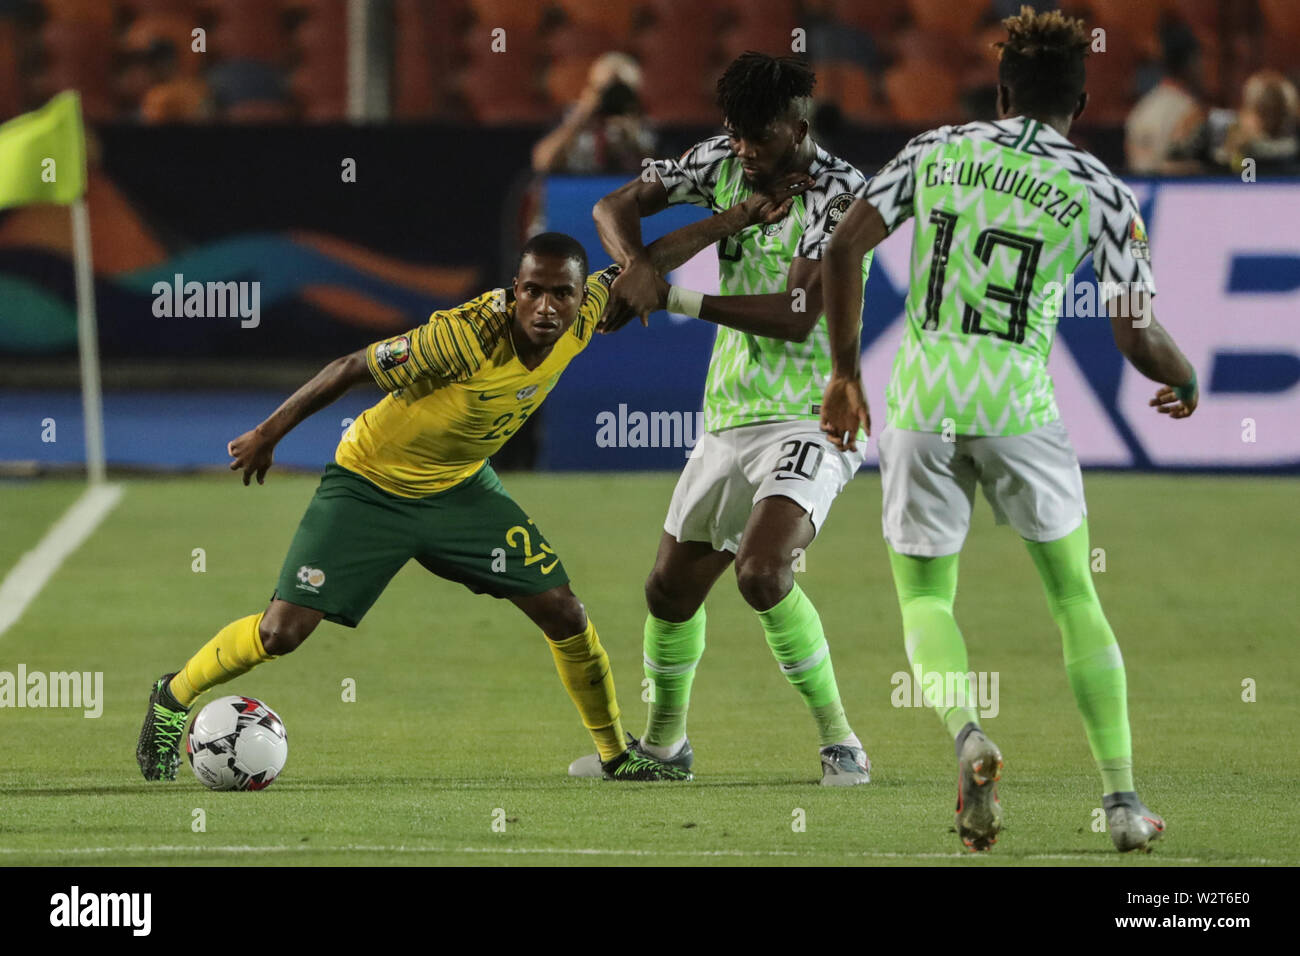 Cairo, Egypt. 10th July, 2019. South Africa's Thembinkosi Lorch (L) battles for the ball with Nigeria's Chidozie Awaziem (C) and Samuel Chukwueze during the 2019 Africa Cup of Nations quarter final soccer match between Nigeria and South Africa at the Cairo International Stadium. Credit: Oliver Weiken/dpa/Alamy Live News Stock Photo